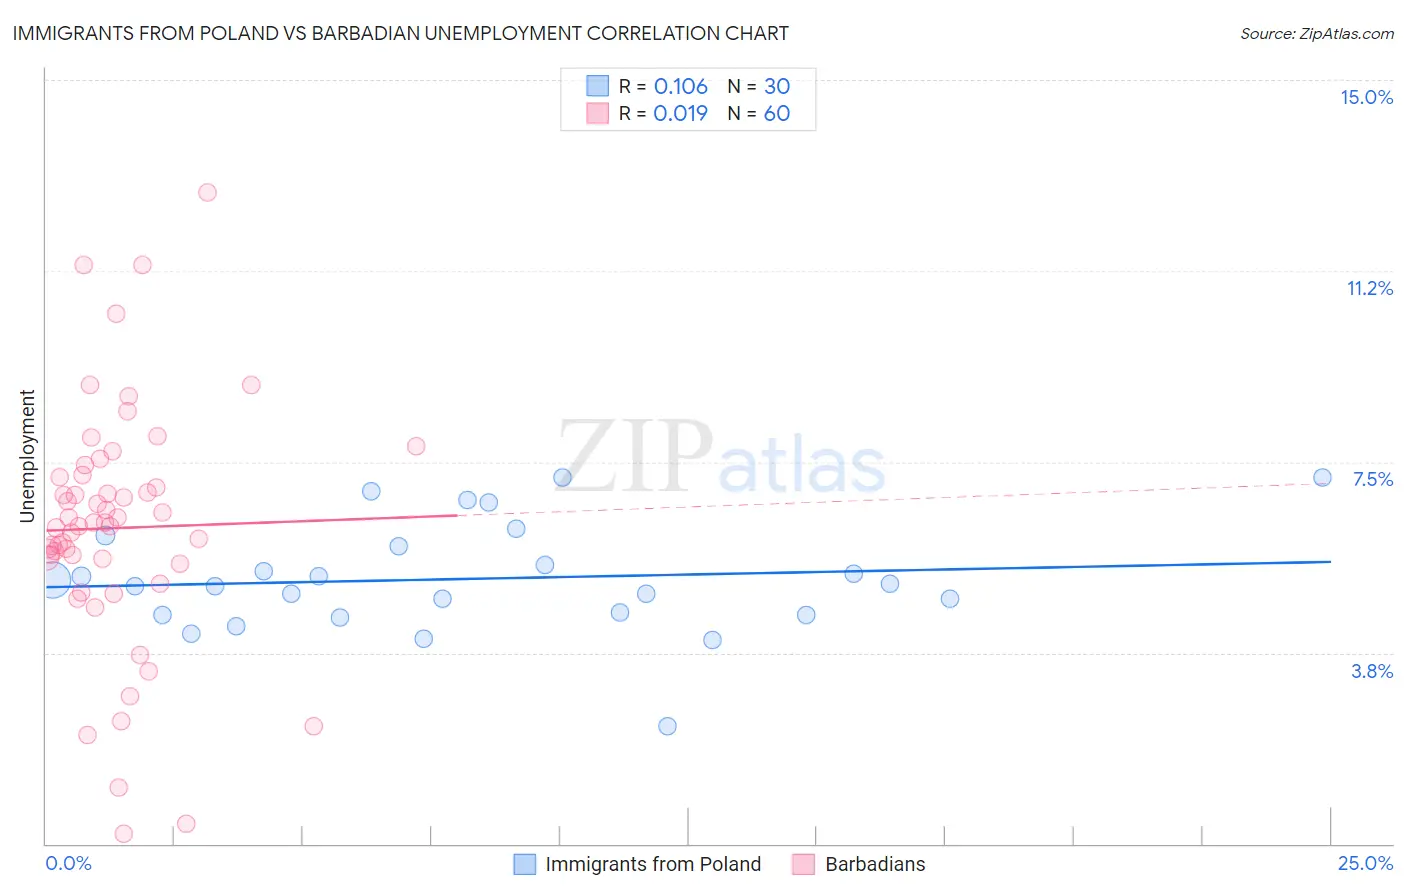 Immigrants from Poland vs Barbadian Unemployment